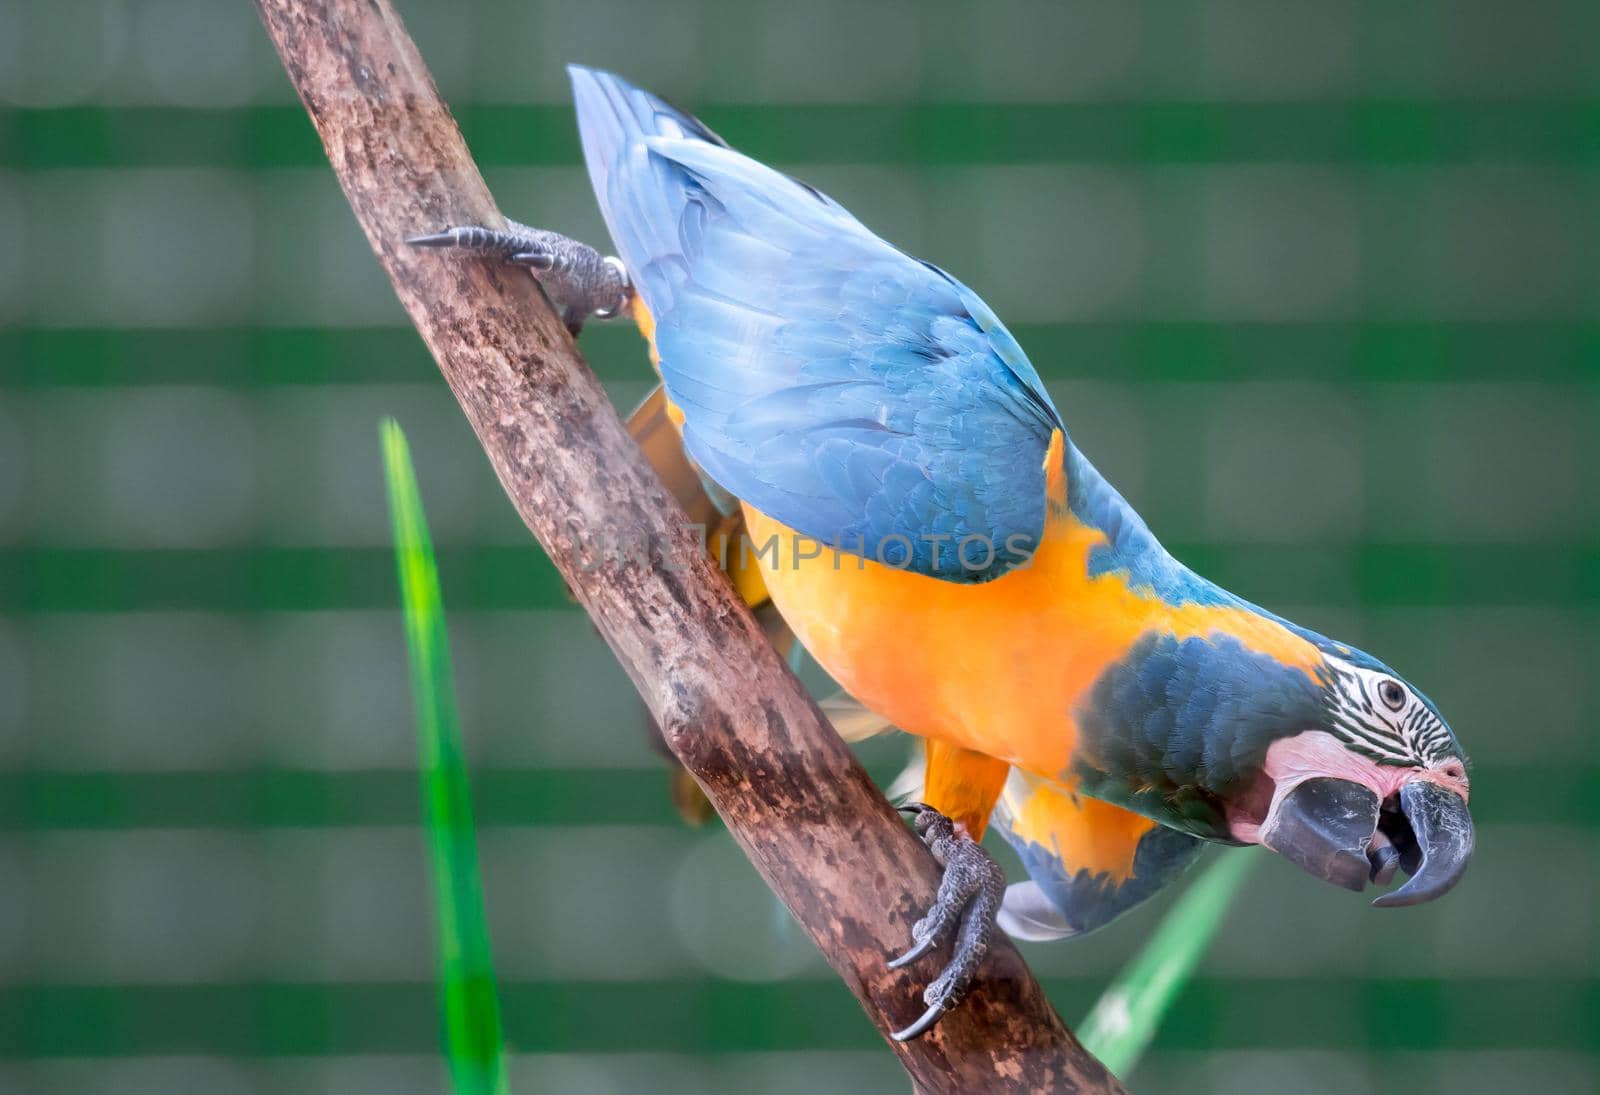 A beautiful blue-and-yellow macaw (Ara ararauna), also known as the blue-and-gold macaw while clinging on a branch